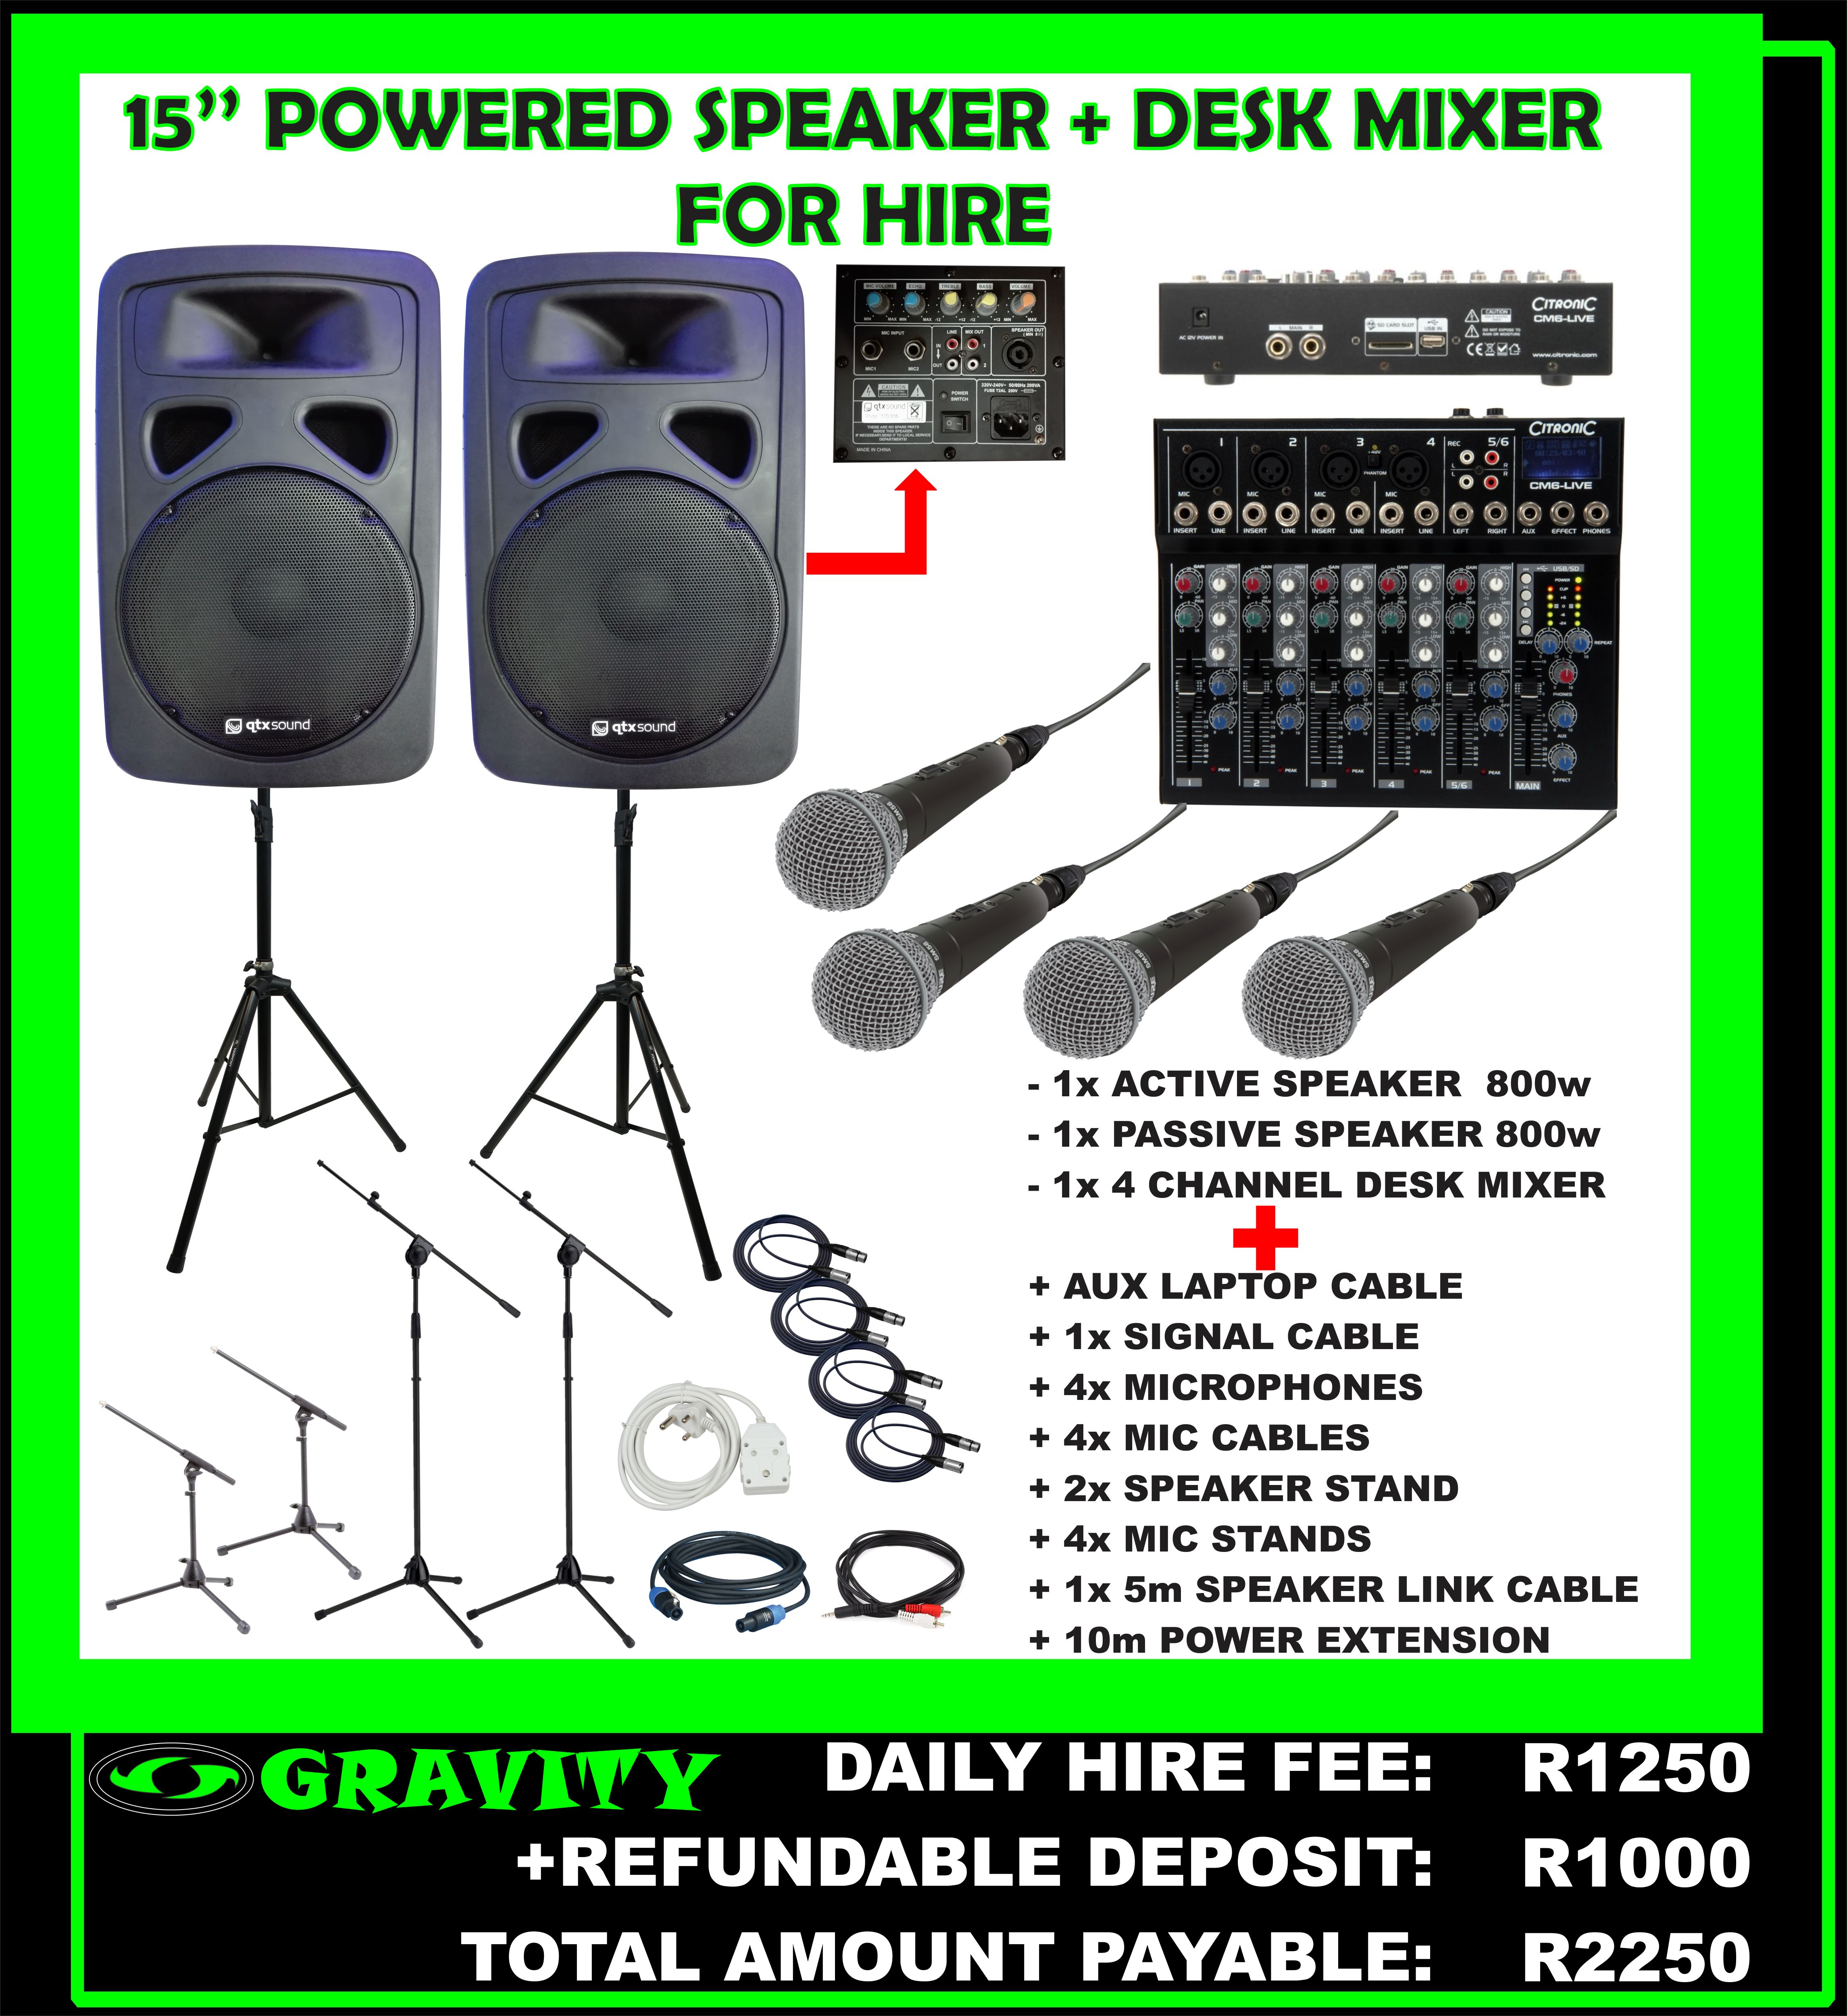 4 MIC PA SOUND BAND SOUND SYSTEM 15'' POWERED SPEAKER HIRE 4 CHANNEL DESK MIXER USB INPUT SD CARD INPUT GRAVITY SOUND AND LIGHTING WAREHOUSE 0315072463